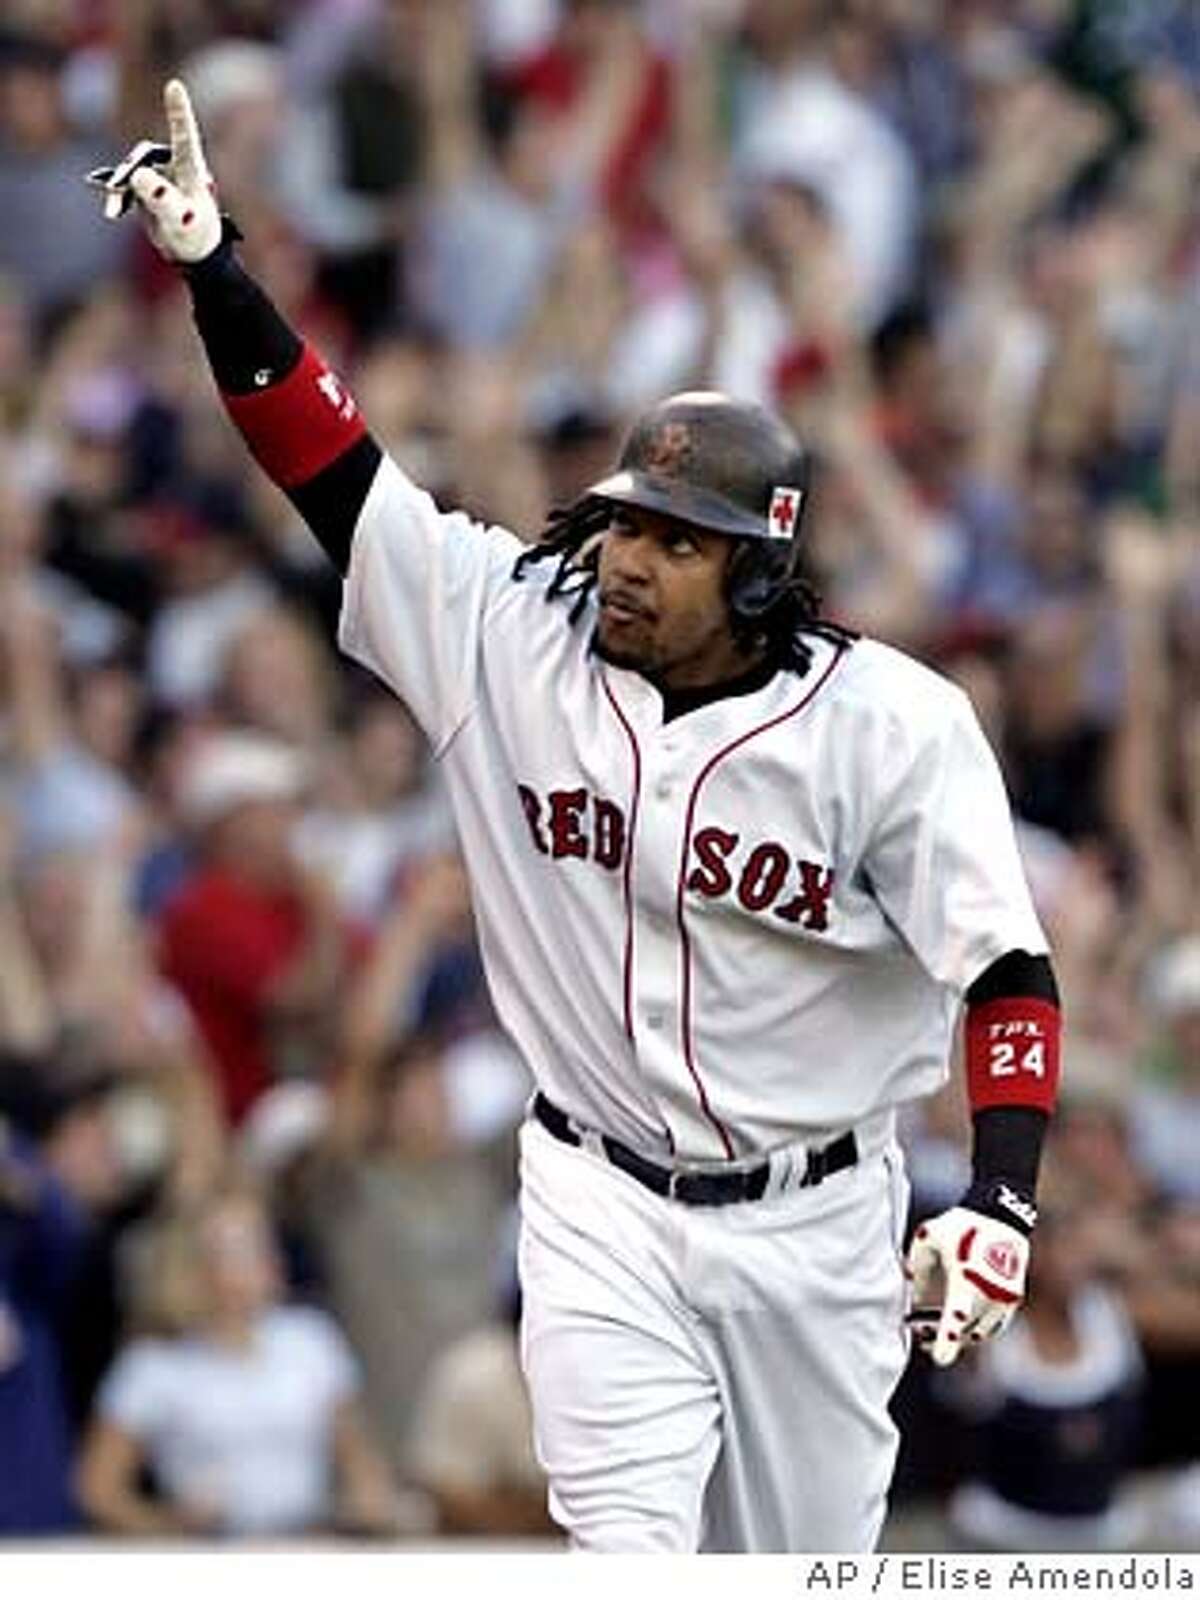 Boston Red Sox' Manny Ramirez rounds the bases after his three-run home run off New York Yankees pitcher Scott Proctor during the fourth inning at Fenway Park in Boston, Sunday, Oct. 2, 2005. At left is Yankees catcher Jorge Posada.(AP Photo/Elise Amendola) Ran on: 10-03-2005 Manny Ramirez rounds the bases after his three-run homer in a rout of the Yankees.